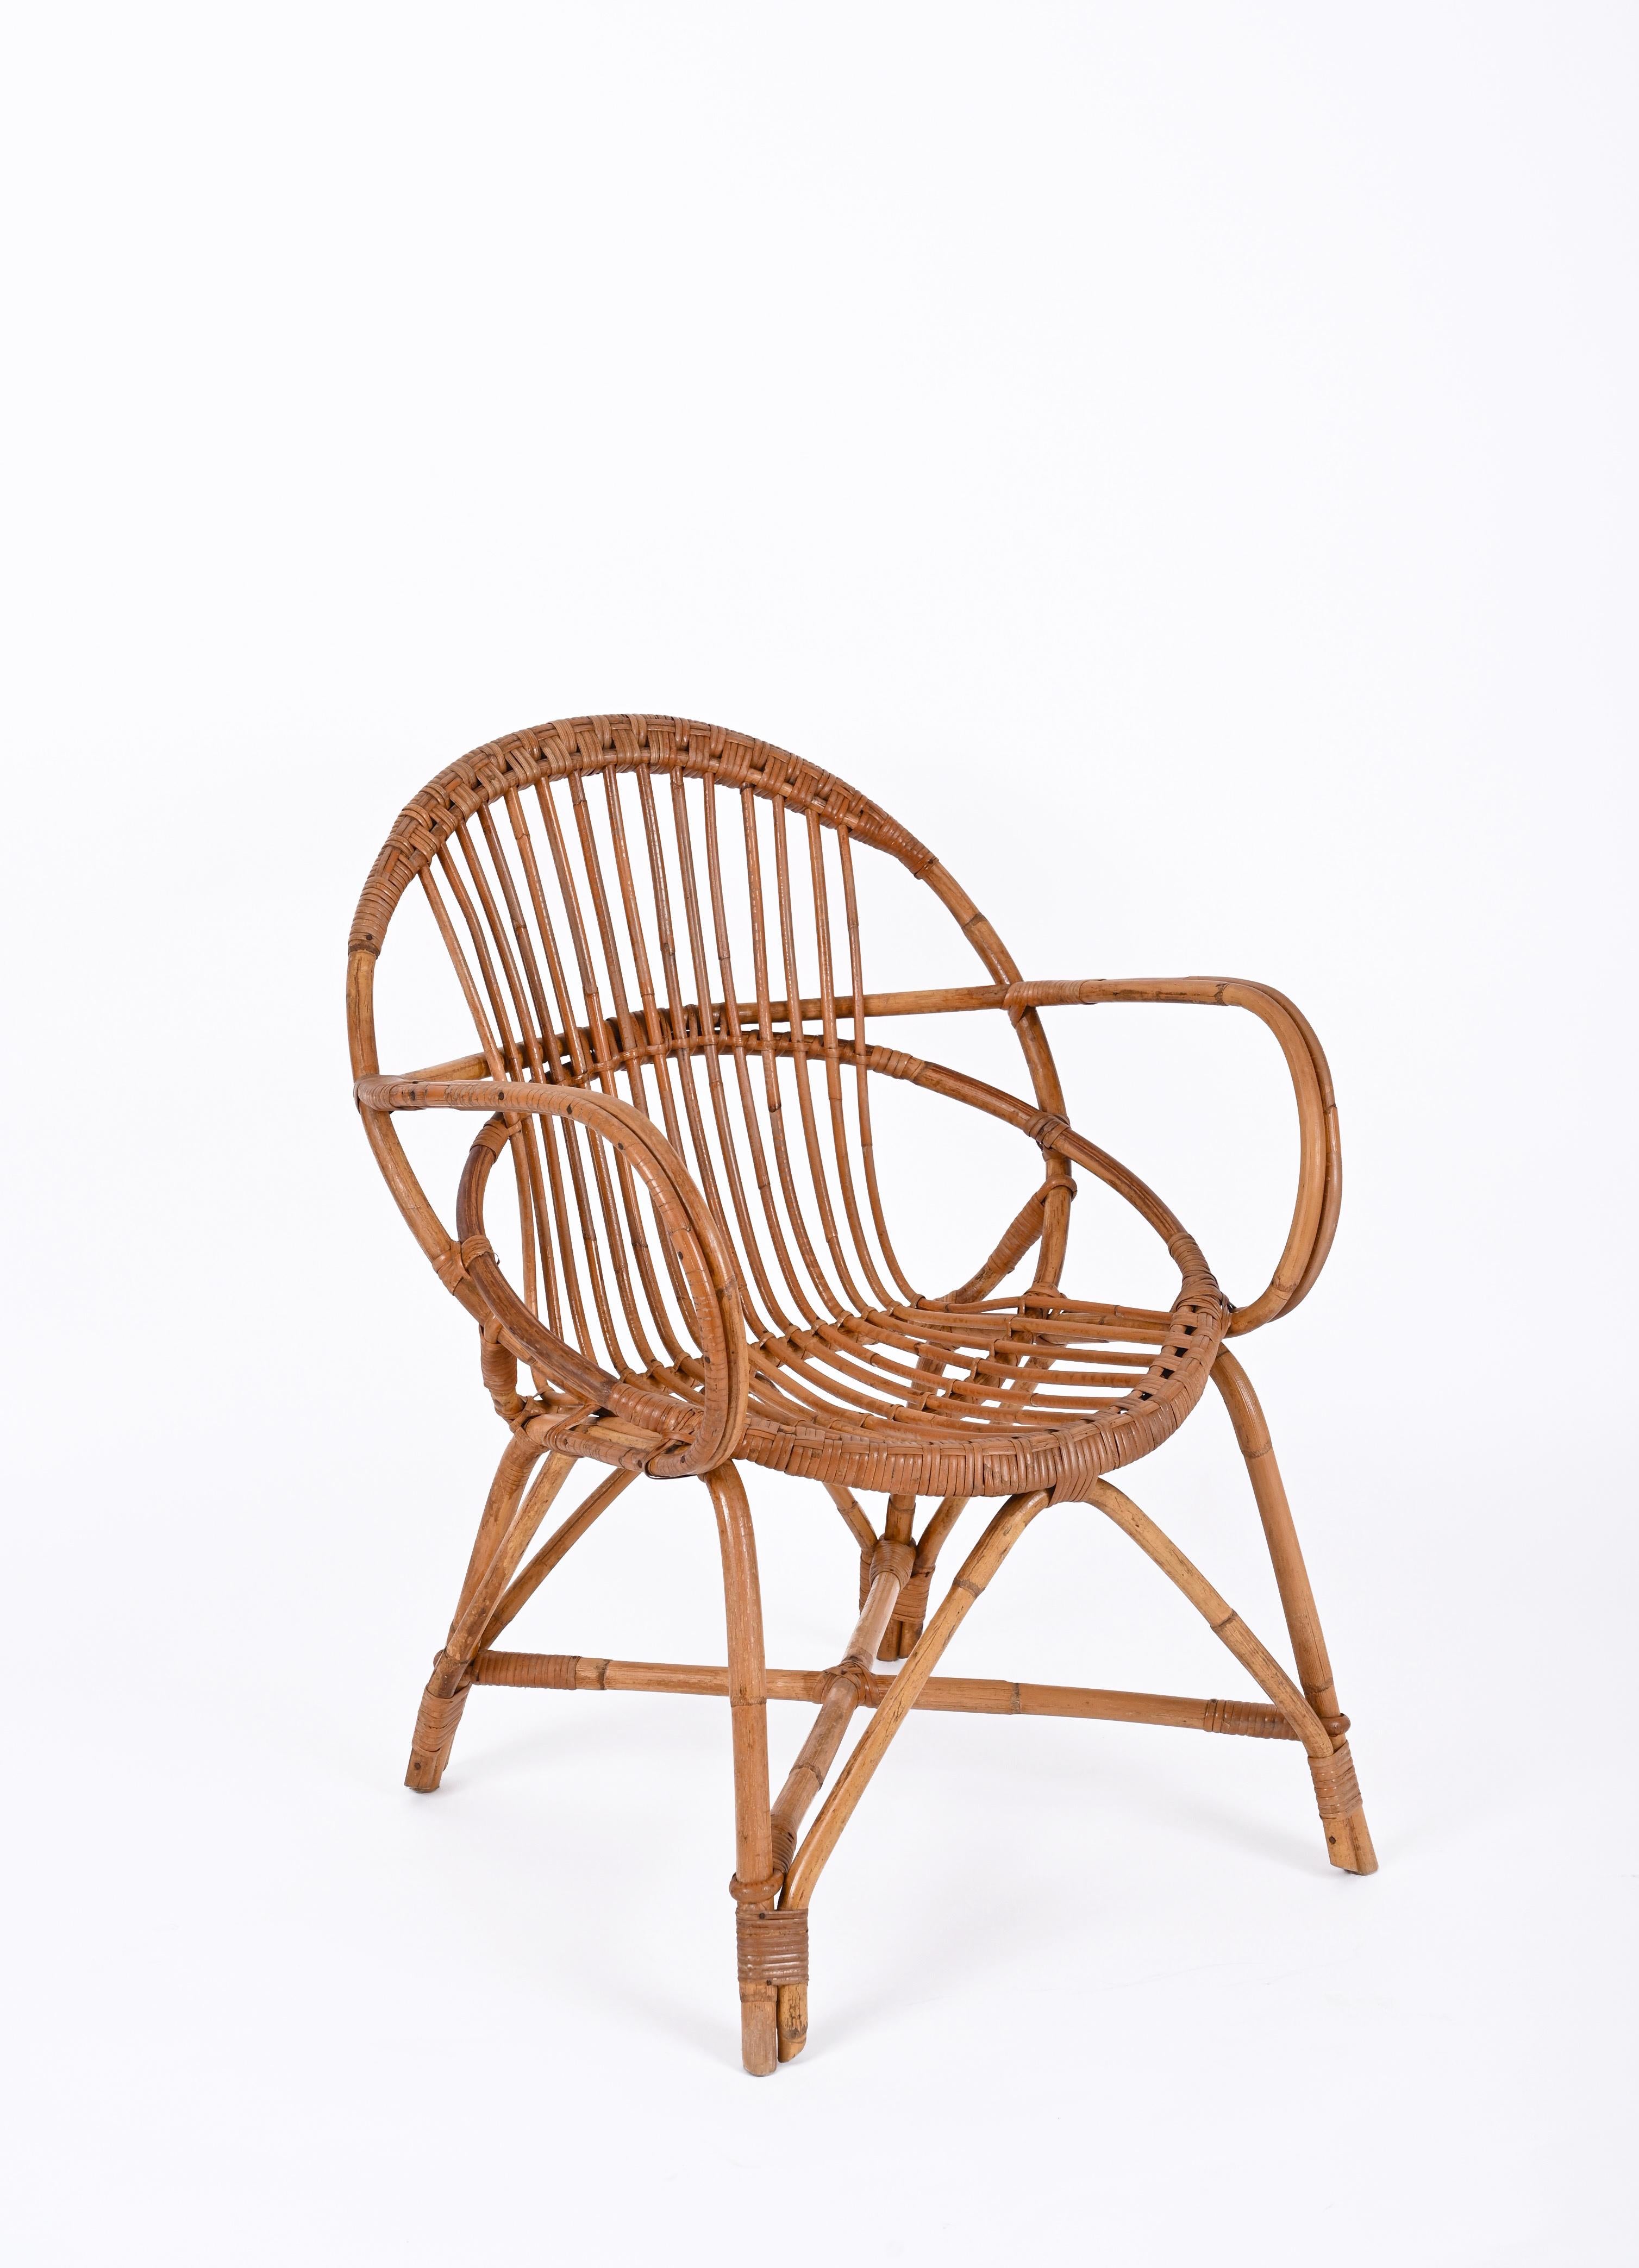 Midcentury Franco Albini Rattan and Bamboo Shell-Shaped Armchair, Italy, 1950s For Sale 7